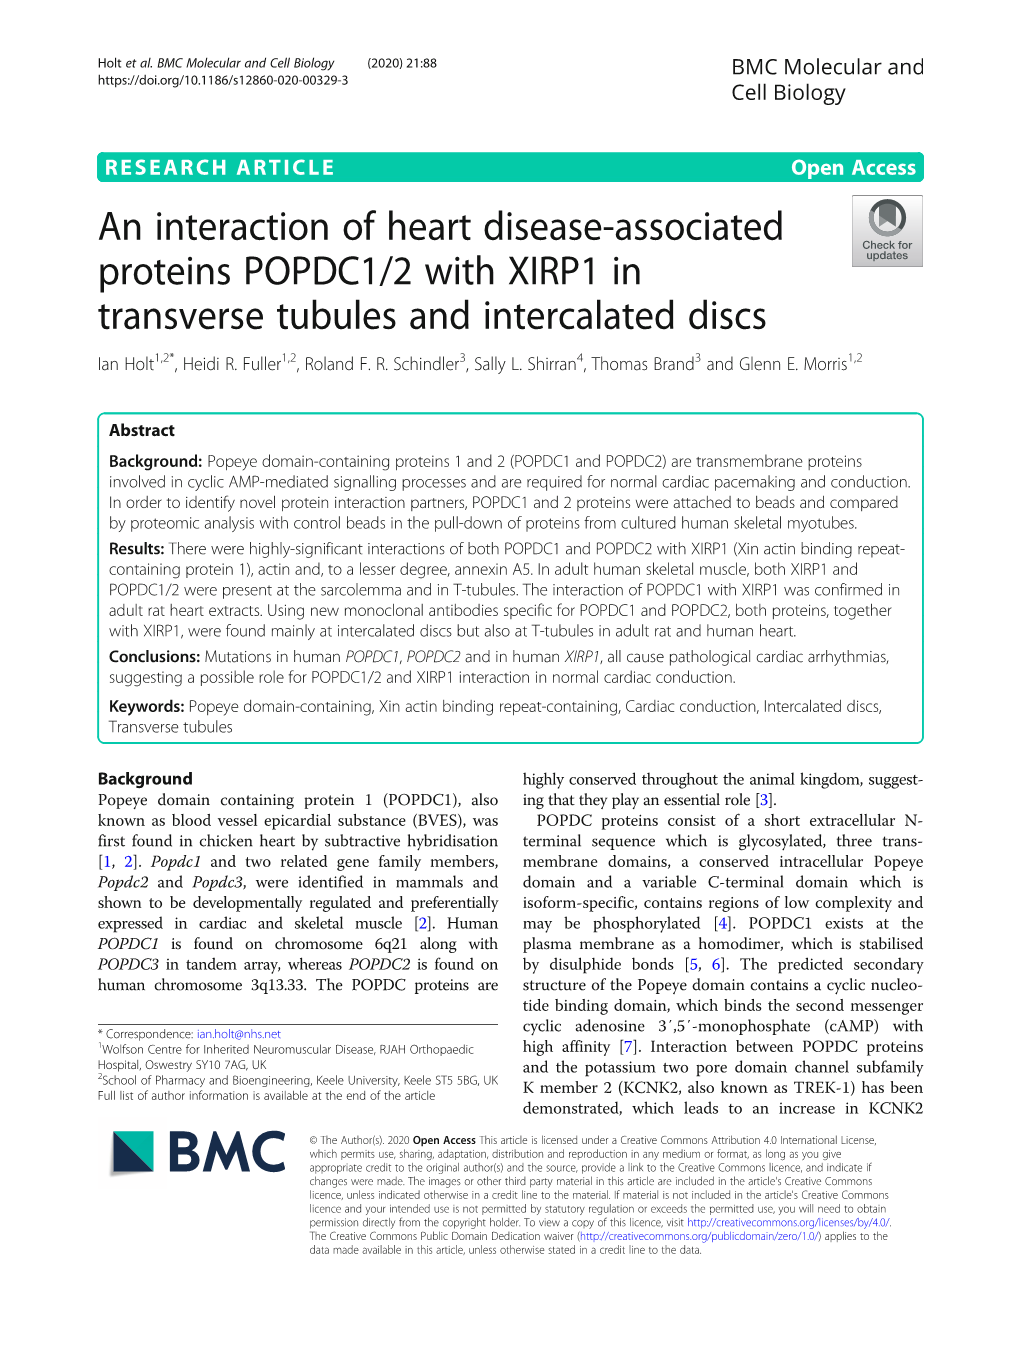 An Interaction of Heart Disease-Associated Proteins POPDC1/2 with XIRP1 in Transverse Tubules and Intercalated Discs Ian Holt1,2*, Heidi R